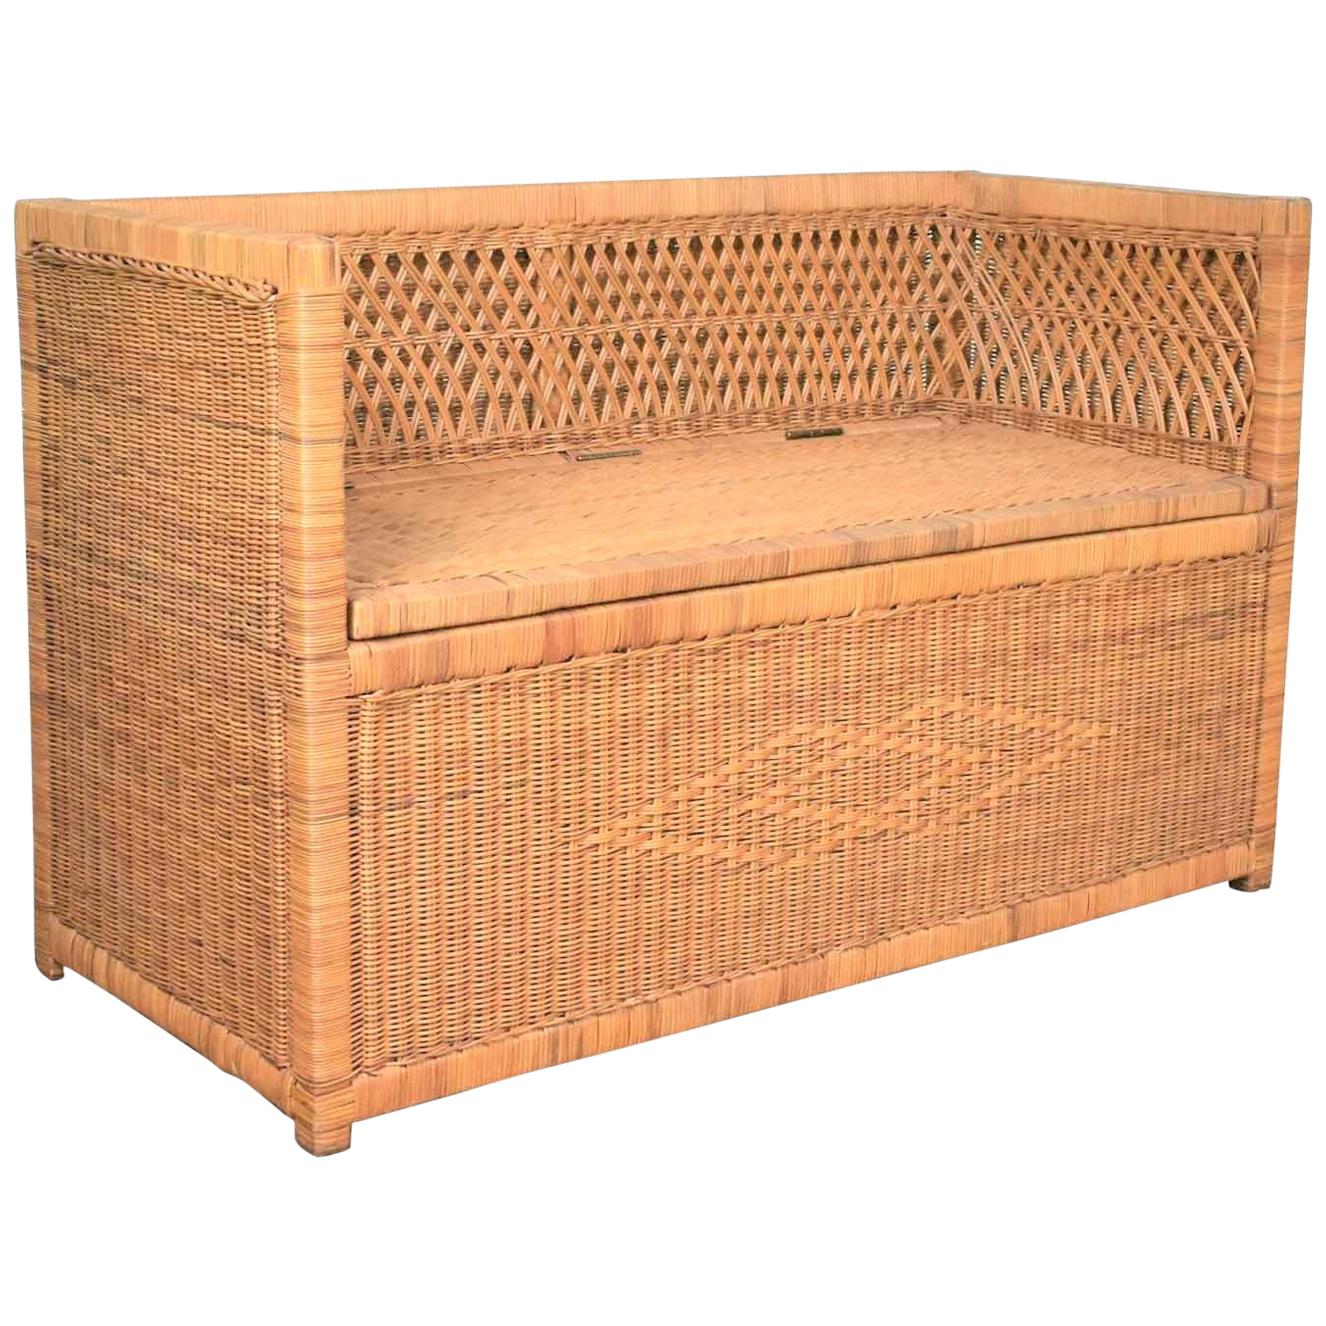 Vintage Modern Wicker Bench Settee with Trunk Style Storage